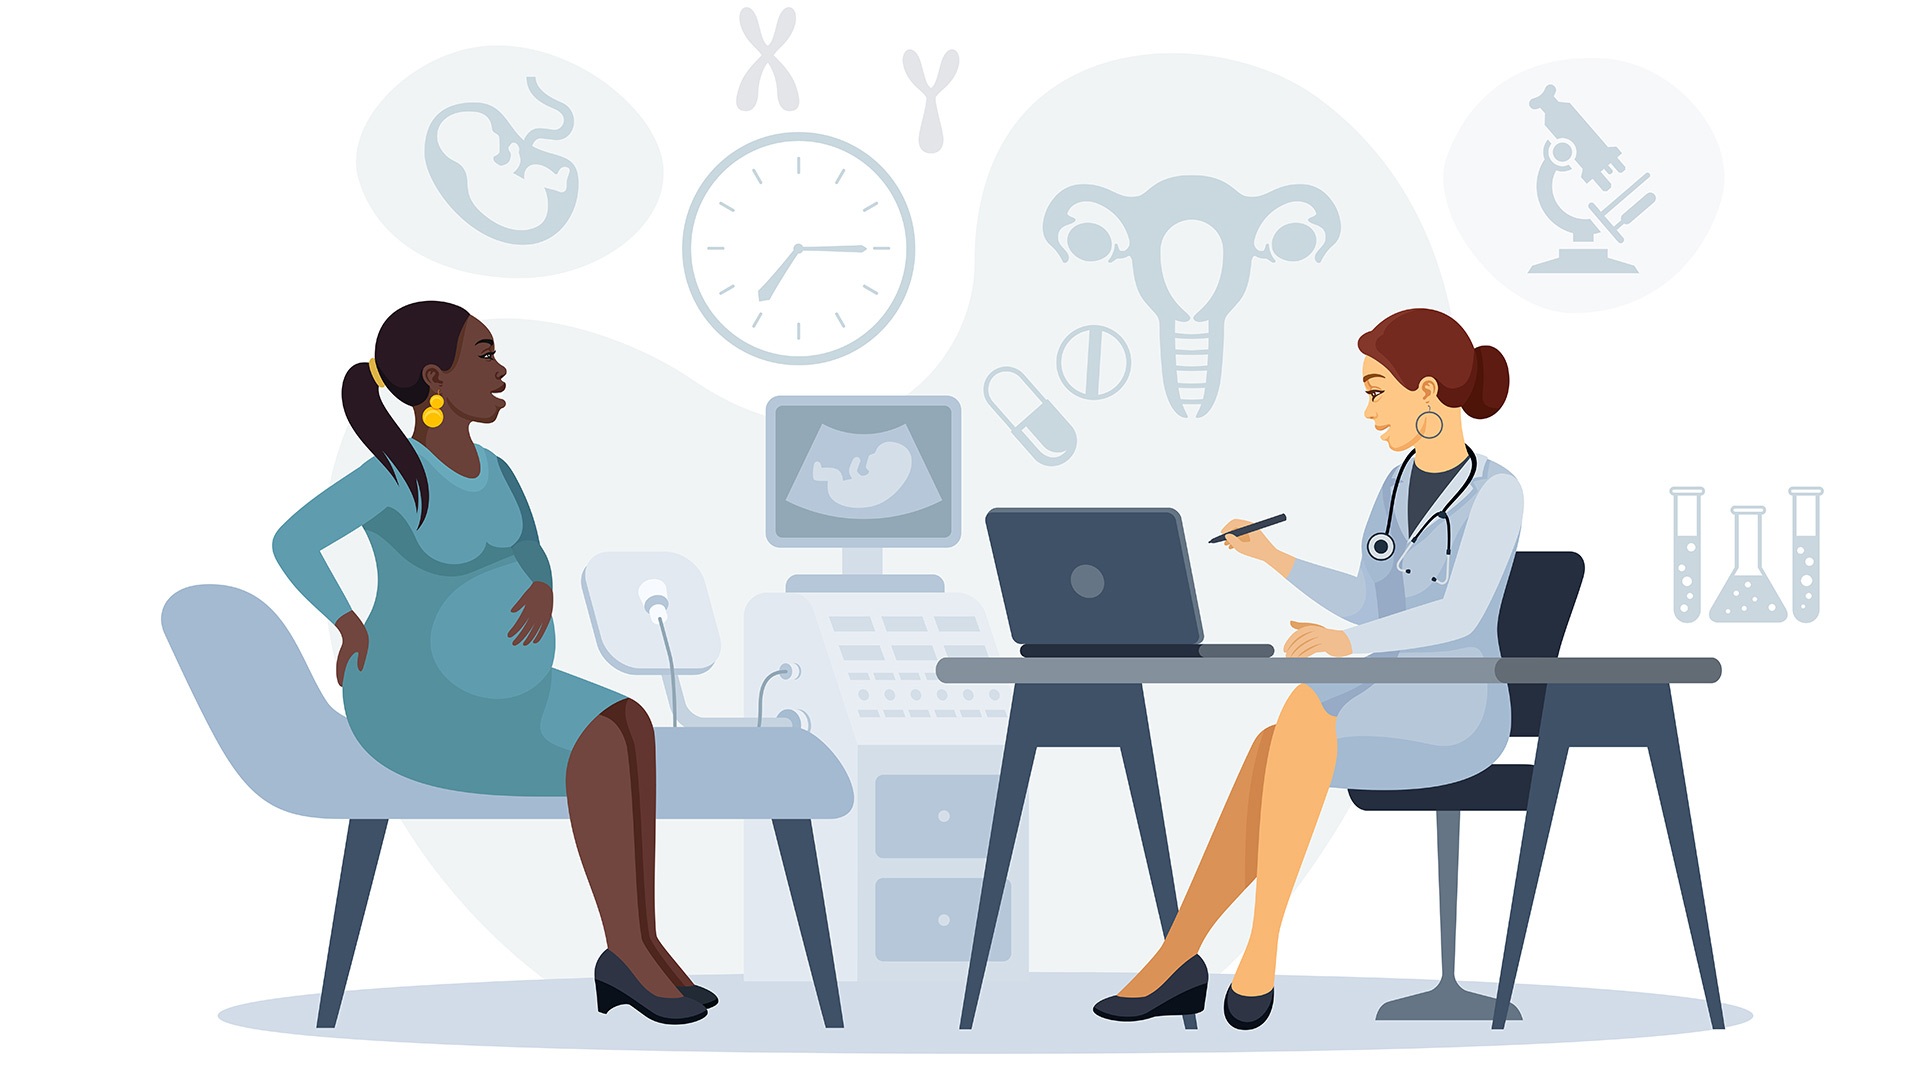 Illustration of a pregnant woman sitting in a chair across from a female doctor who is sitting at a desk and looking at a laptop computer.